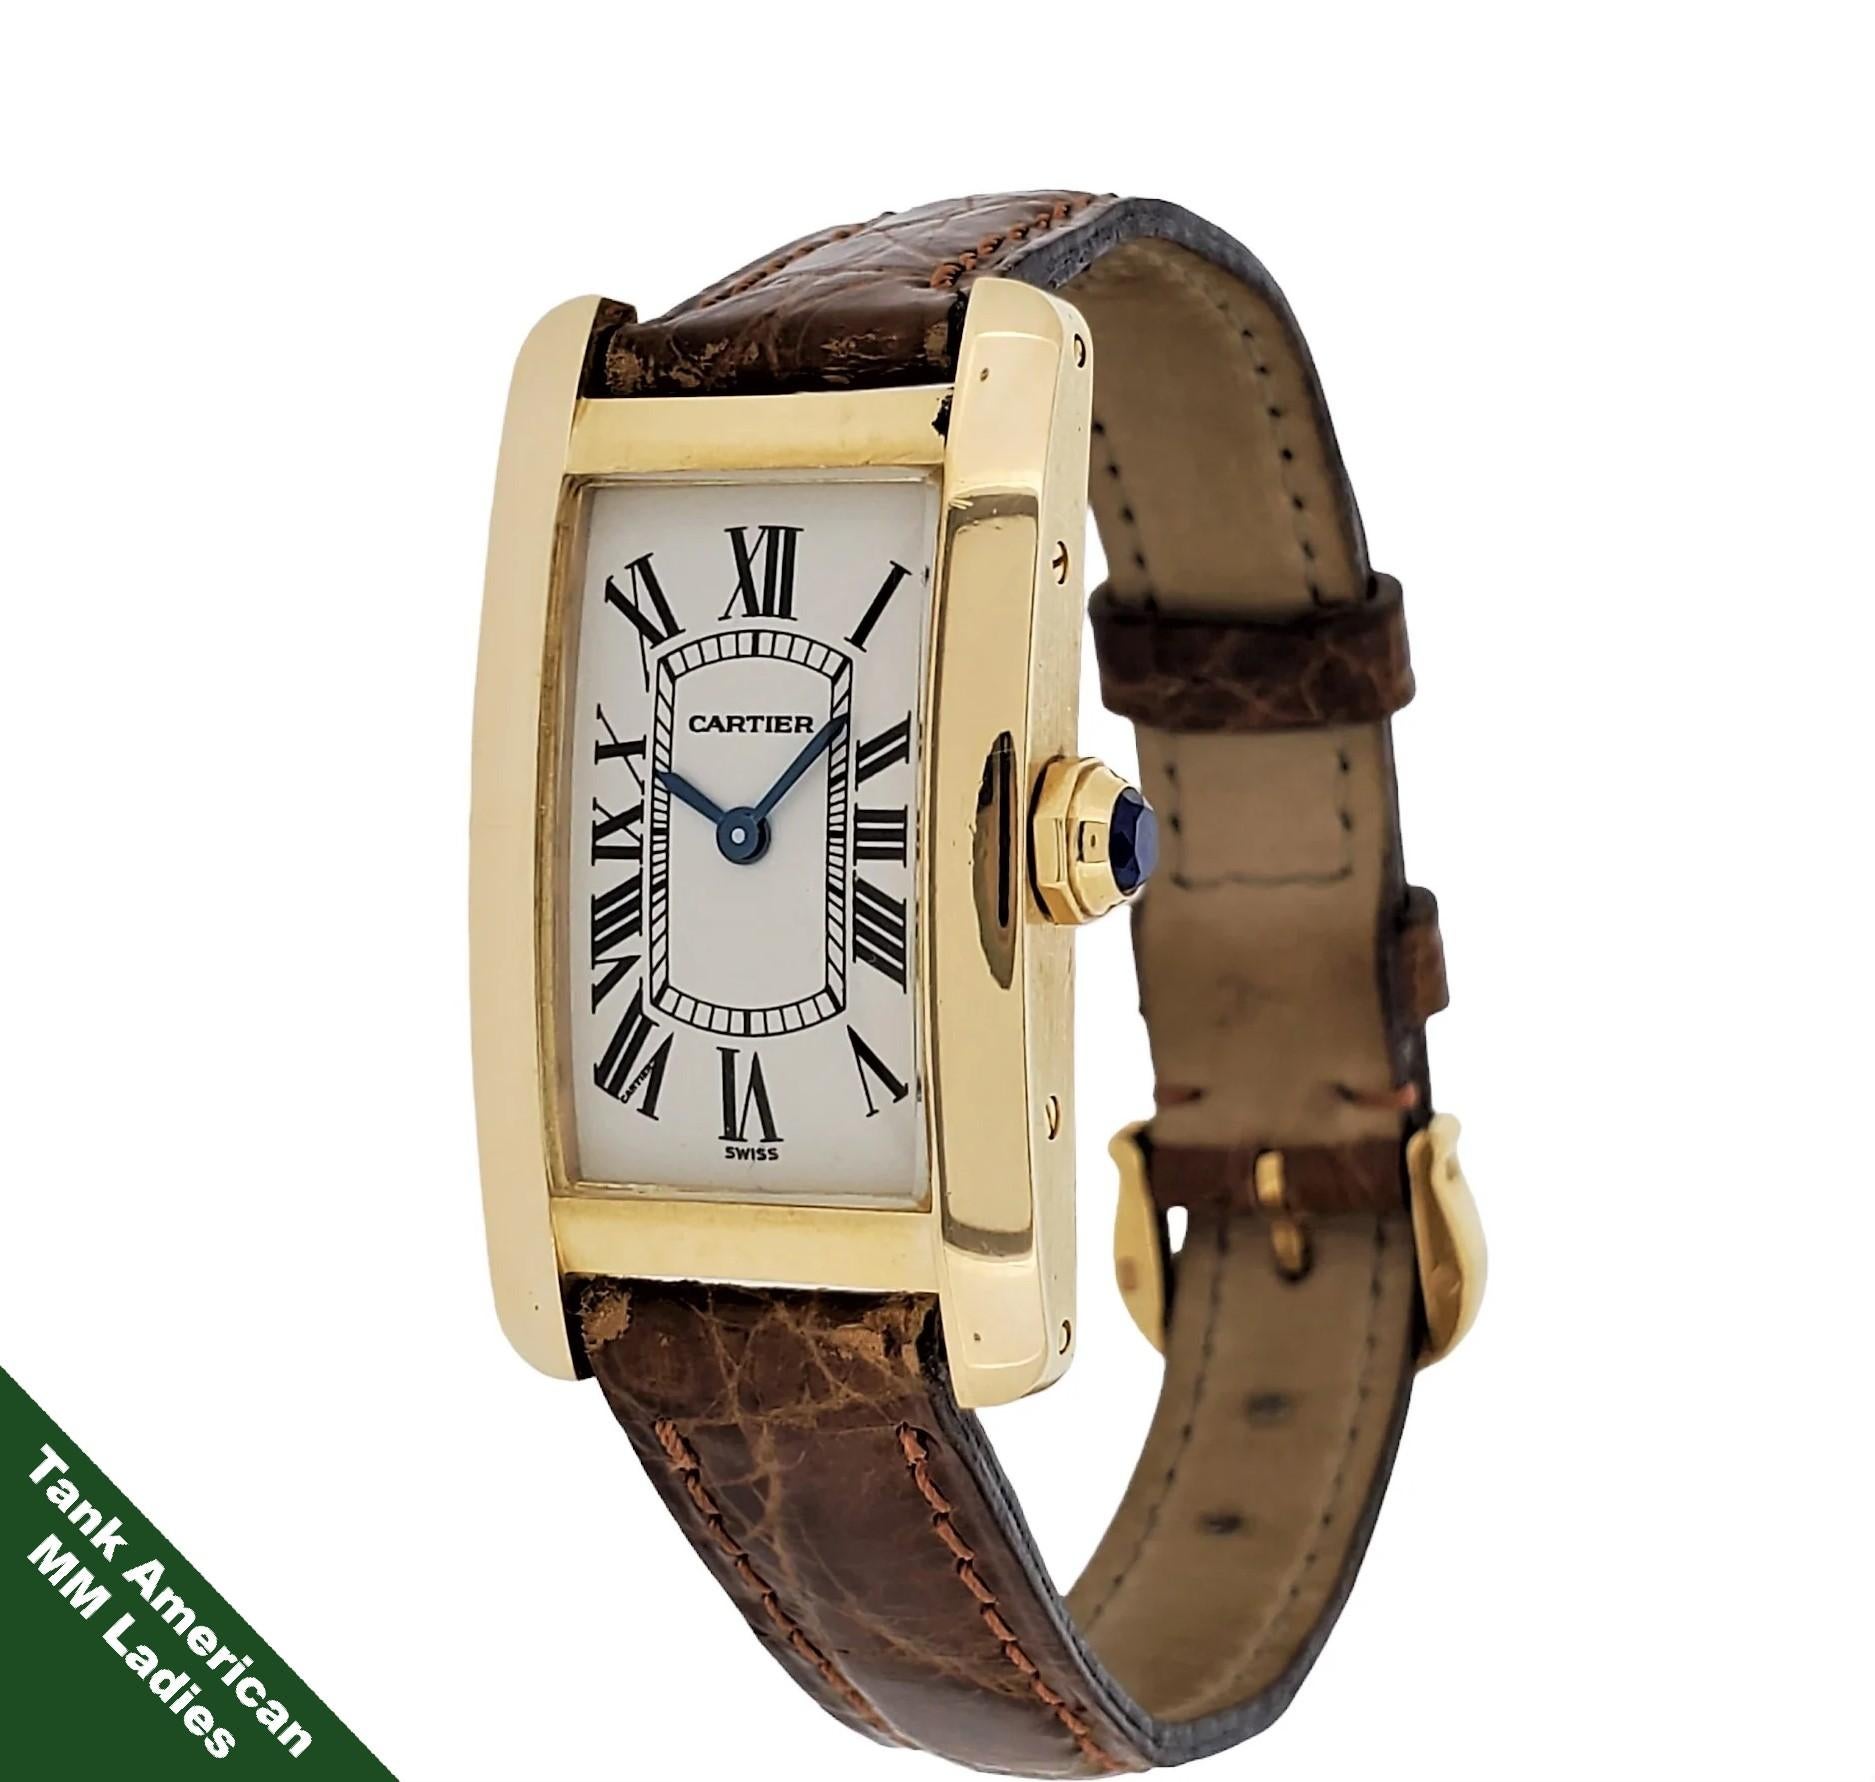 Introduction:
Cartier American Tank, MM Ladies 18K yellow gold watch measuring 20 x 35mm.  The watch if fitted with a quartz movement, and is accompanied with its original Cartier  light brown Croco strap and Cartier 18K gold buckle.  The watch has